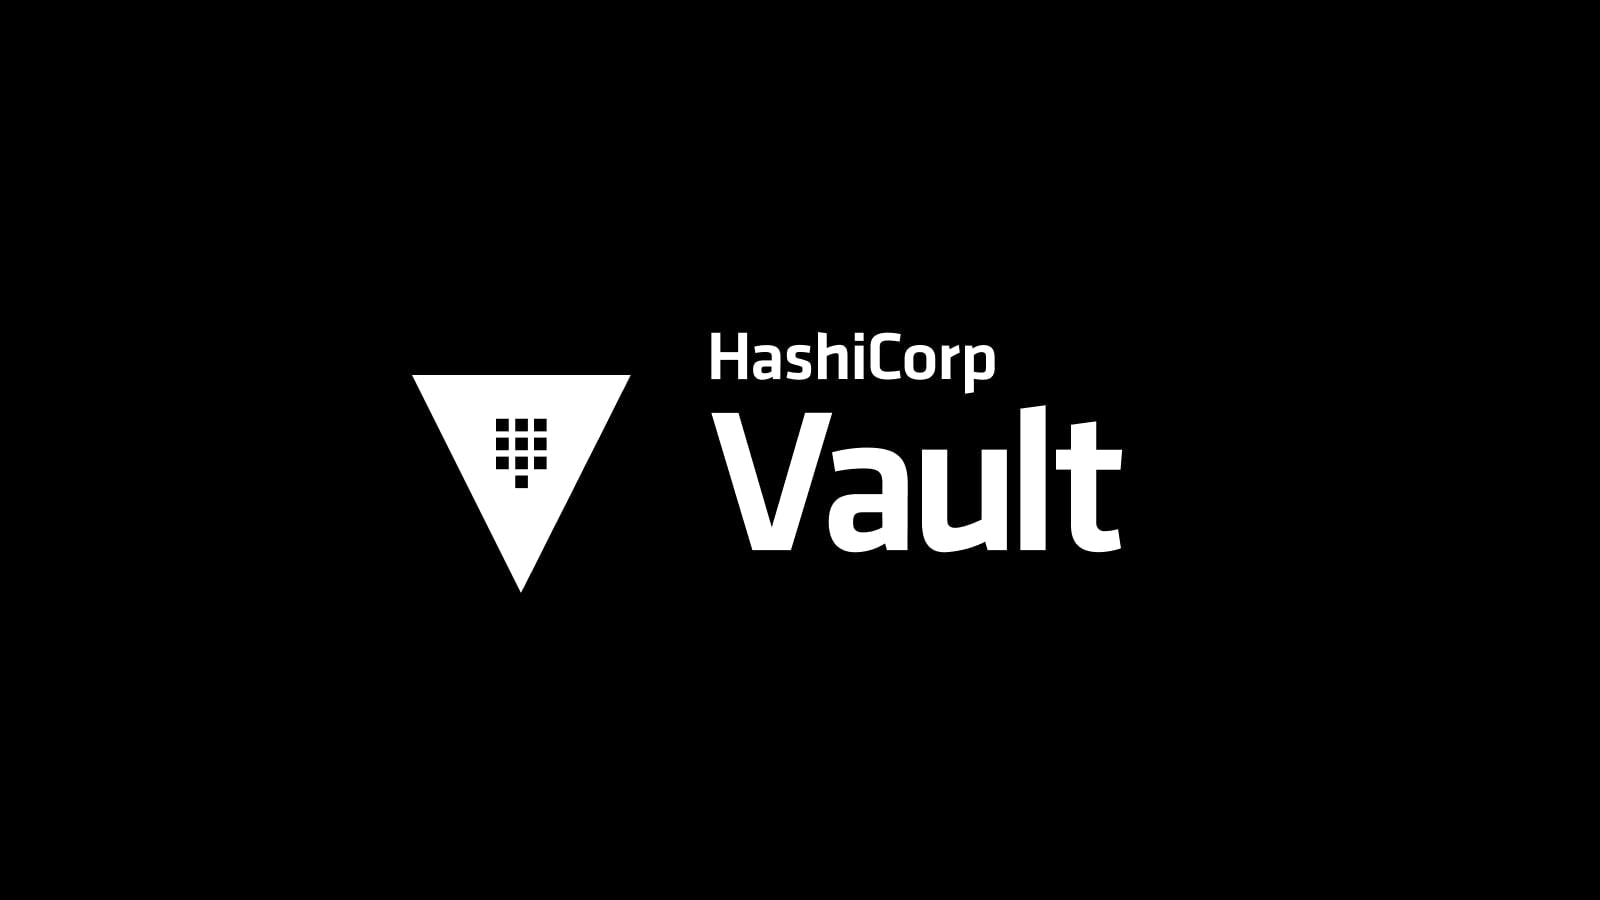 HashiCorp Vault Integrates with ServiceNow for Credential Management 